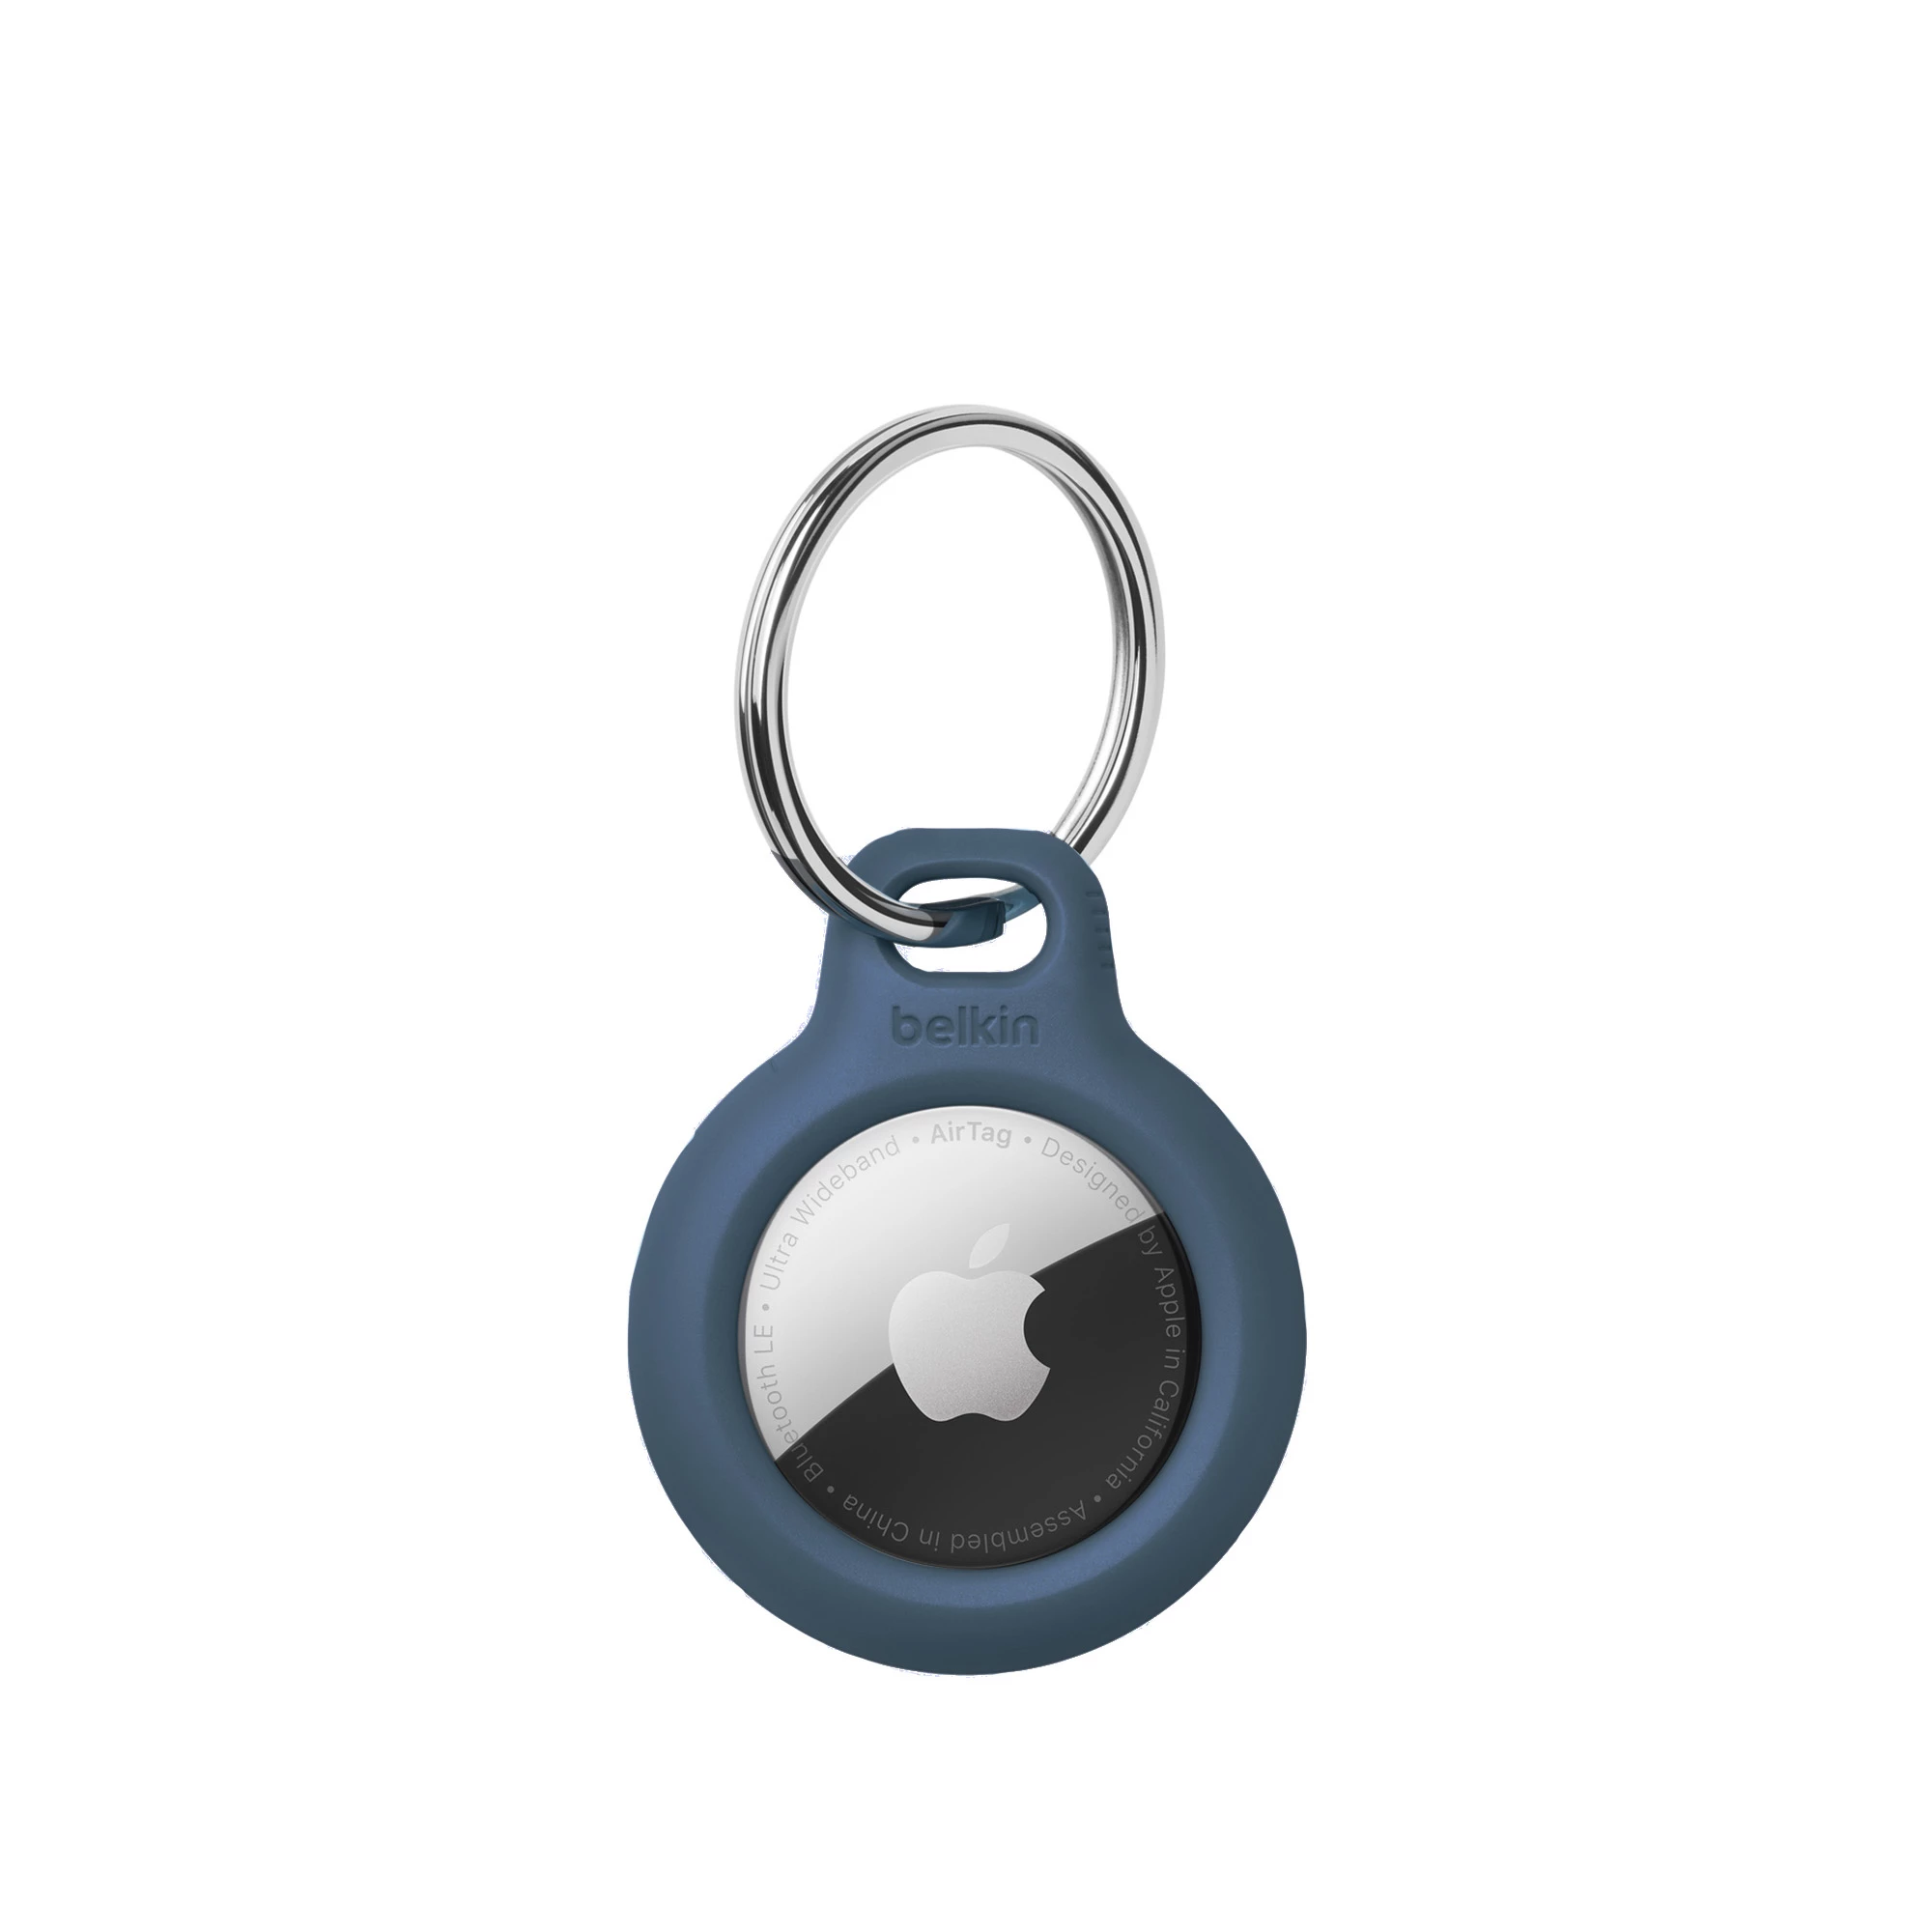 Belkin Secure Holder with Key Ring for AirTag 1-шт - Dark Blue (MSC001dsBL)